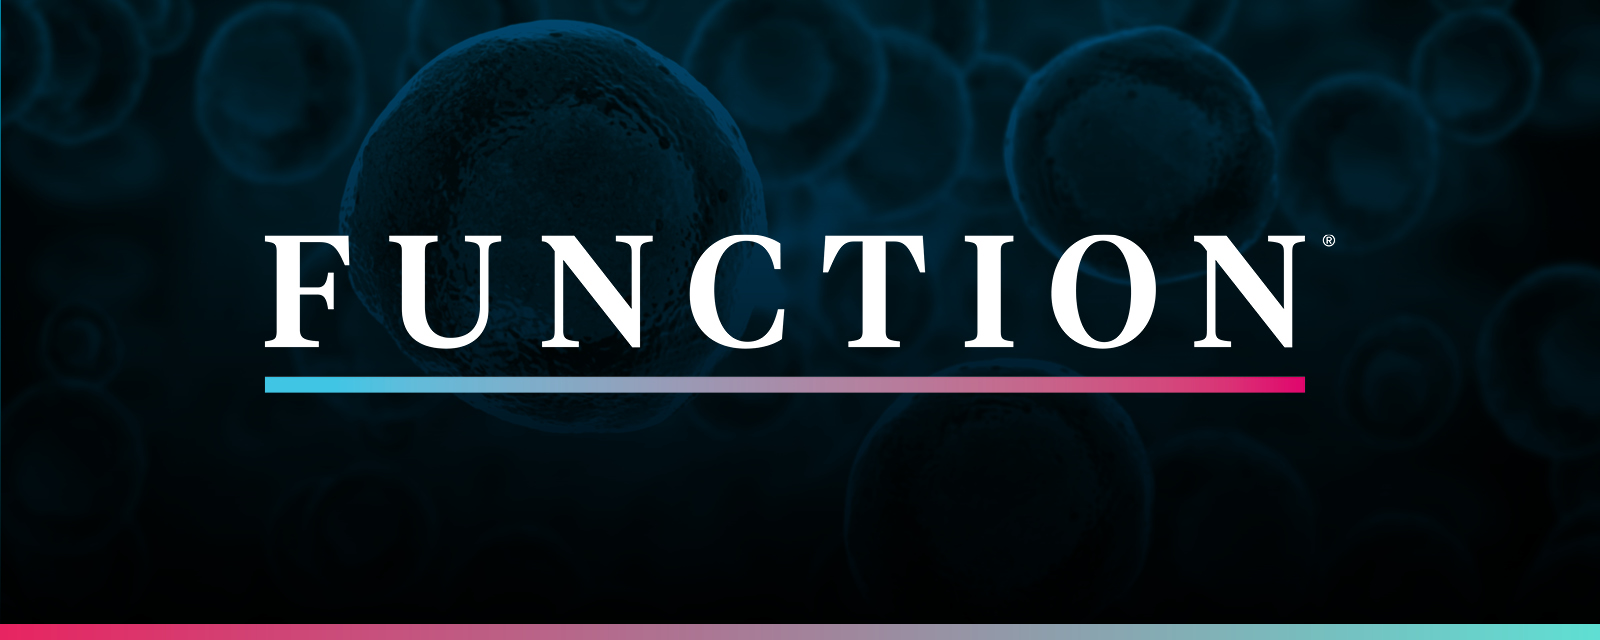 Function - Accessory Cells as Background Actors